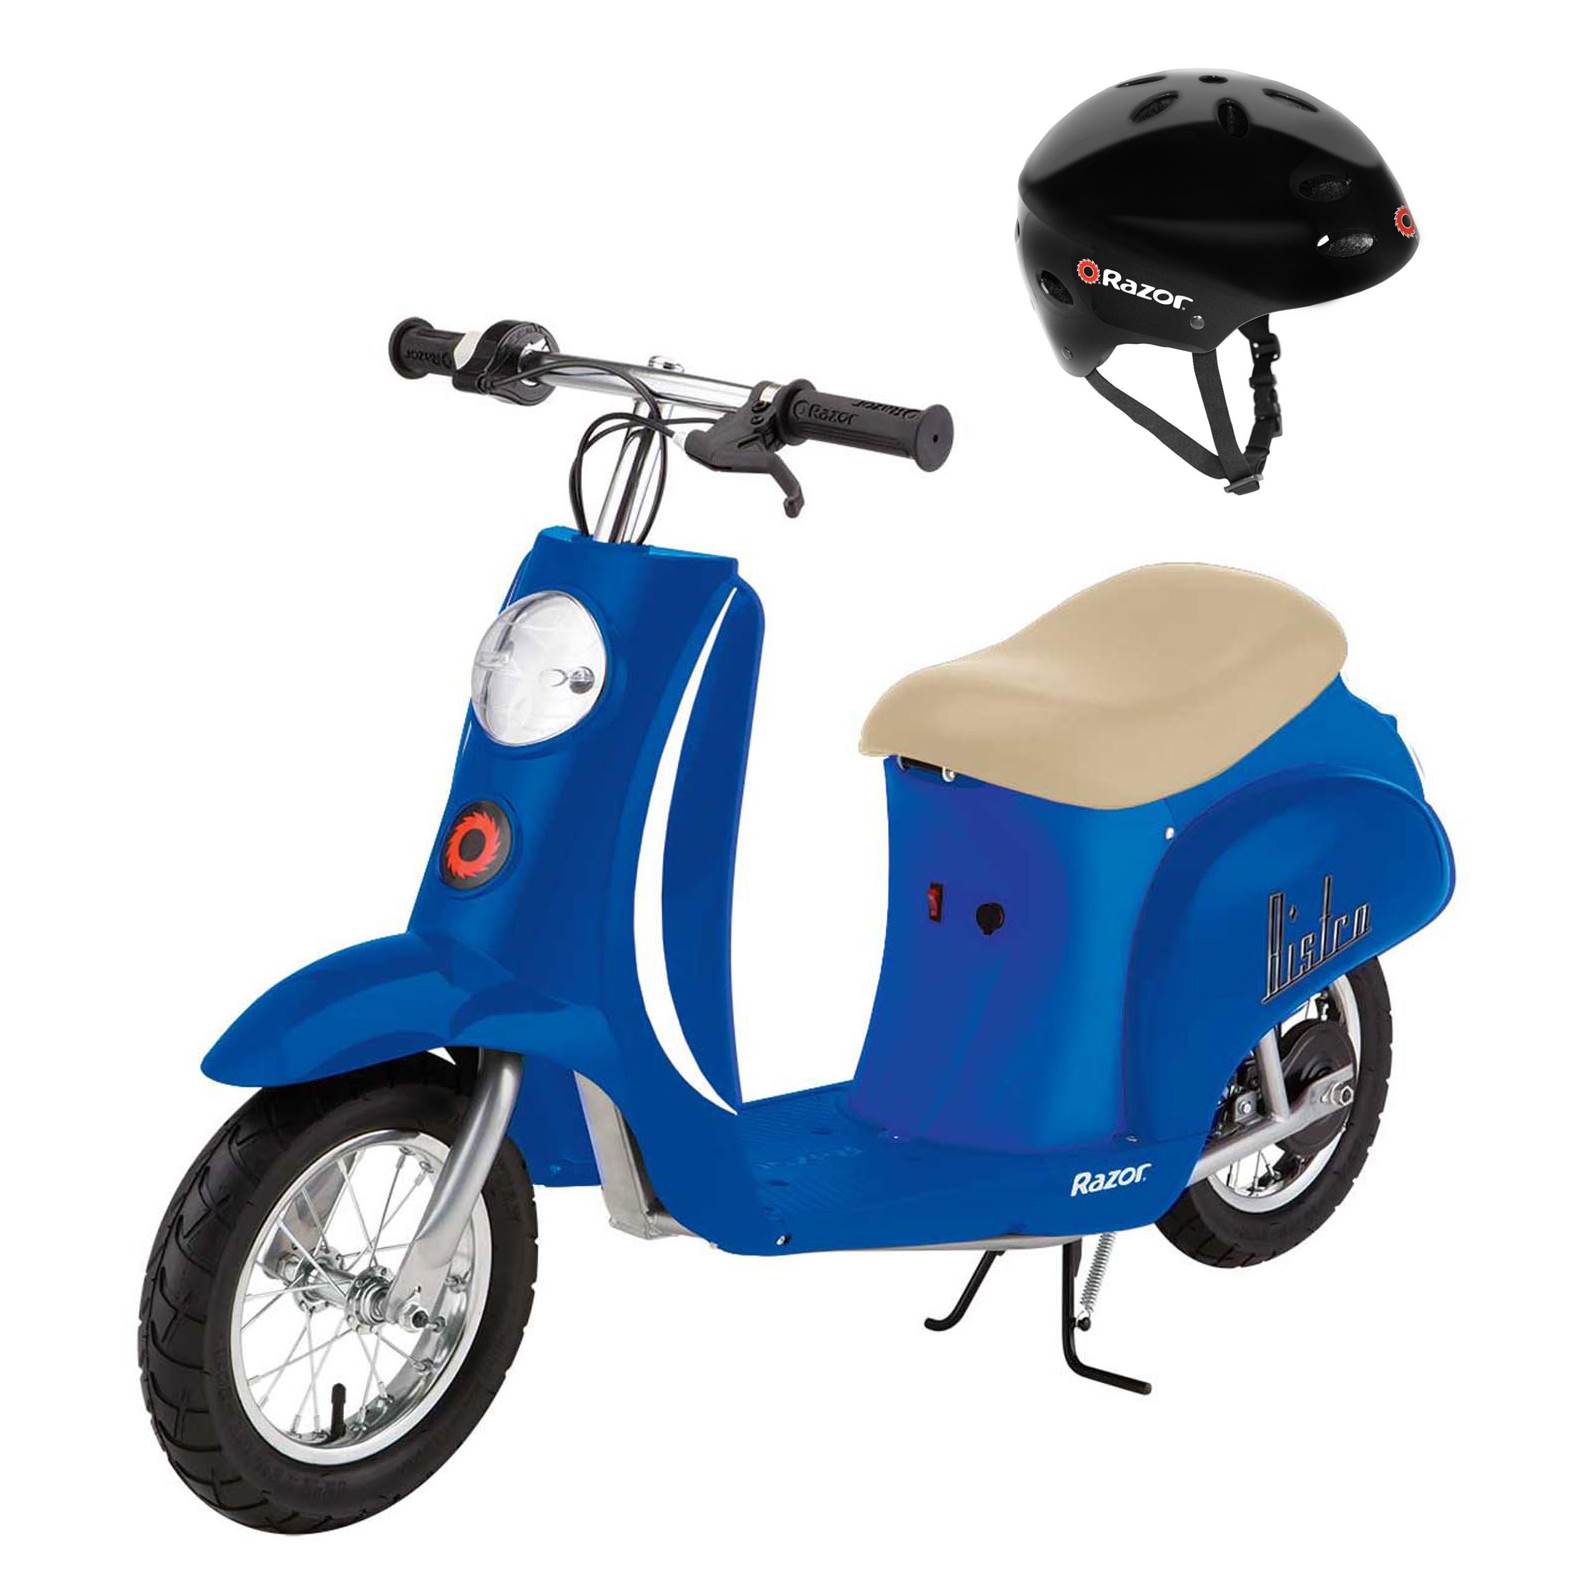 Razor Razor Pocket Mod Euro 24V Electric Kids Retro Scooter with Helmet, Blue in Scooters department at Lowes.com